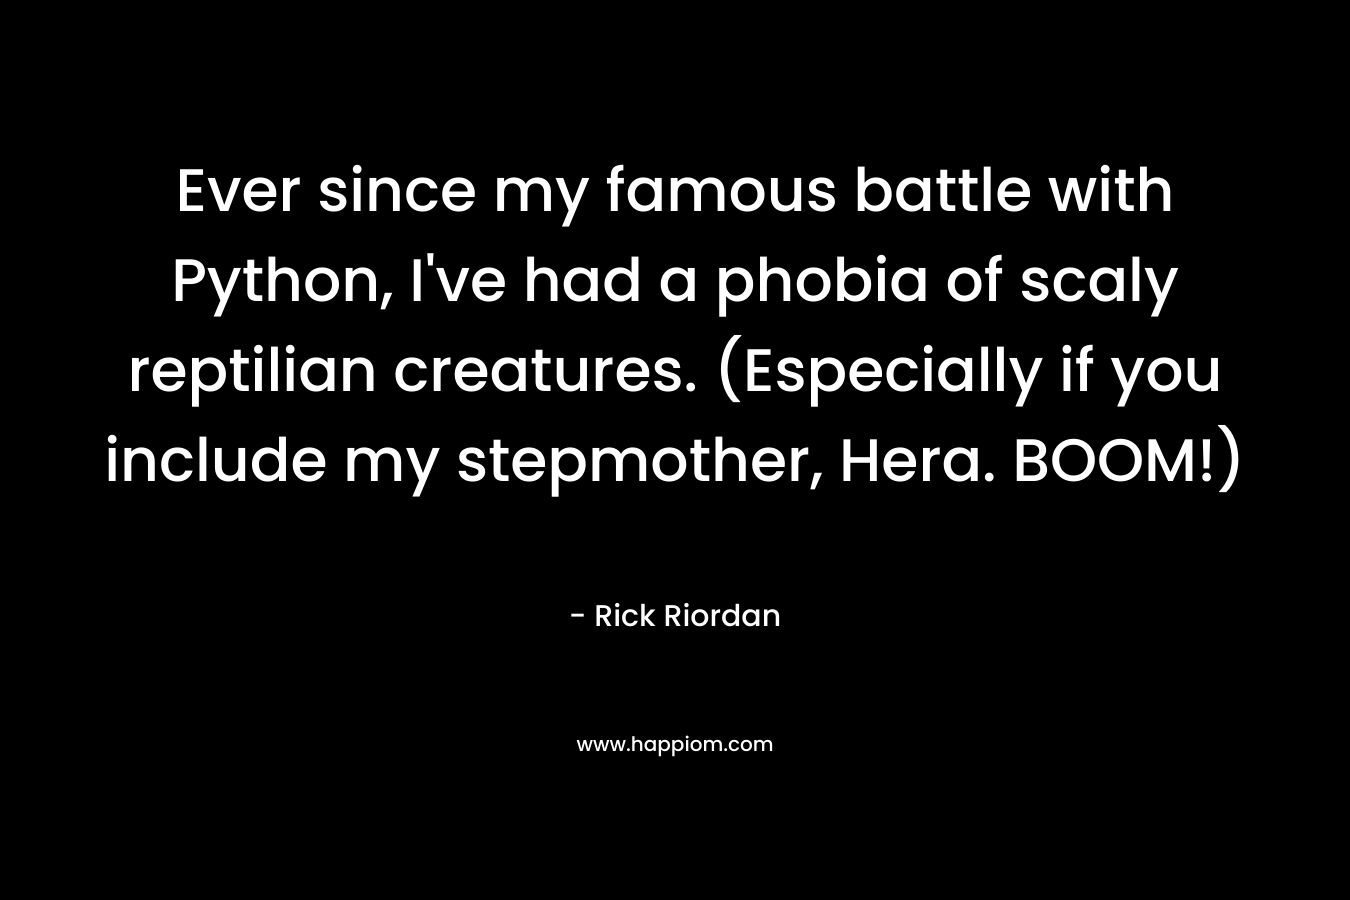 Ever since my famous battle with Python, I've had a phobia of scaly reptilian creatures. (Especially if you include my stepmother, Hera. BOOM!)